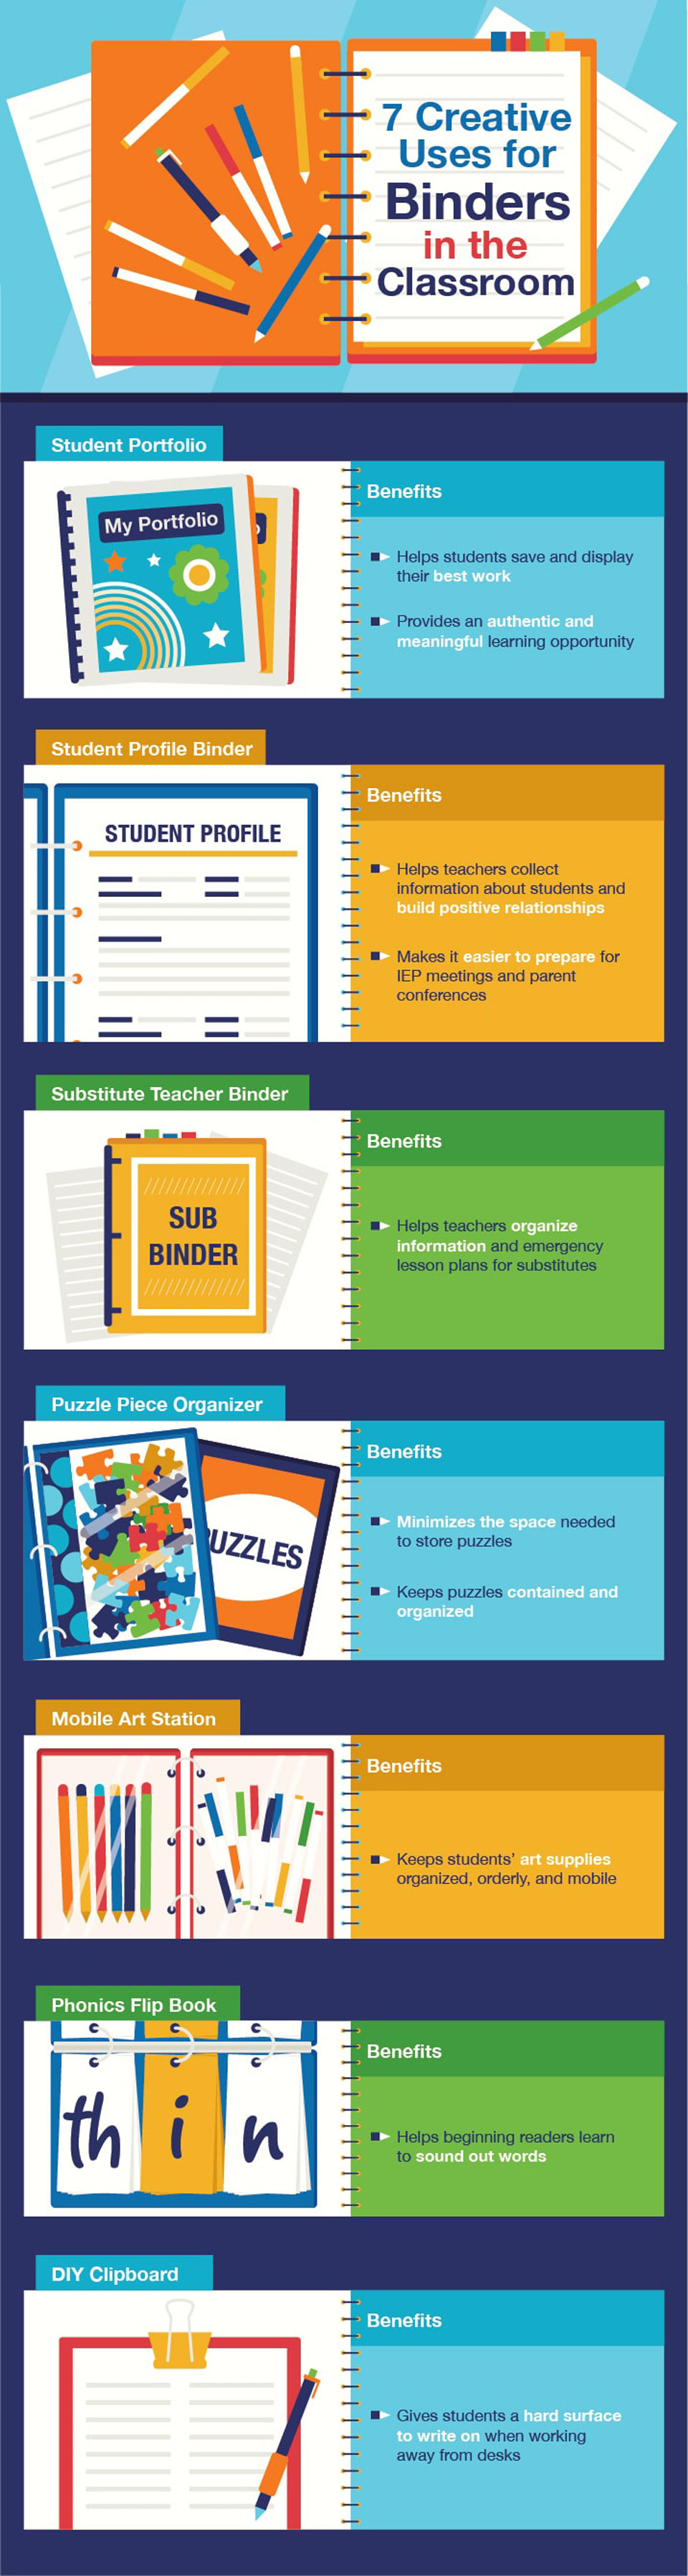 Creative uses for binders in the classroom